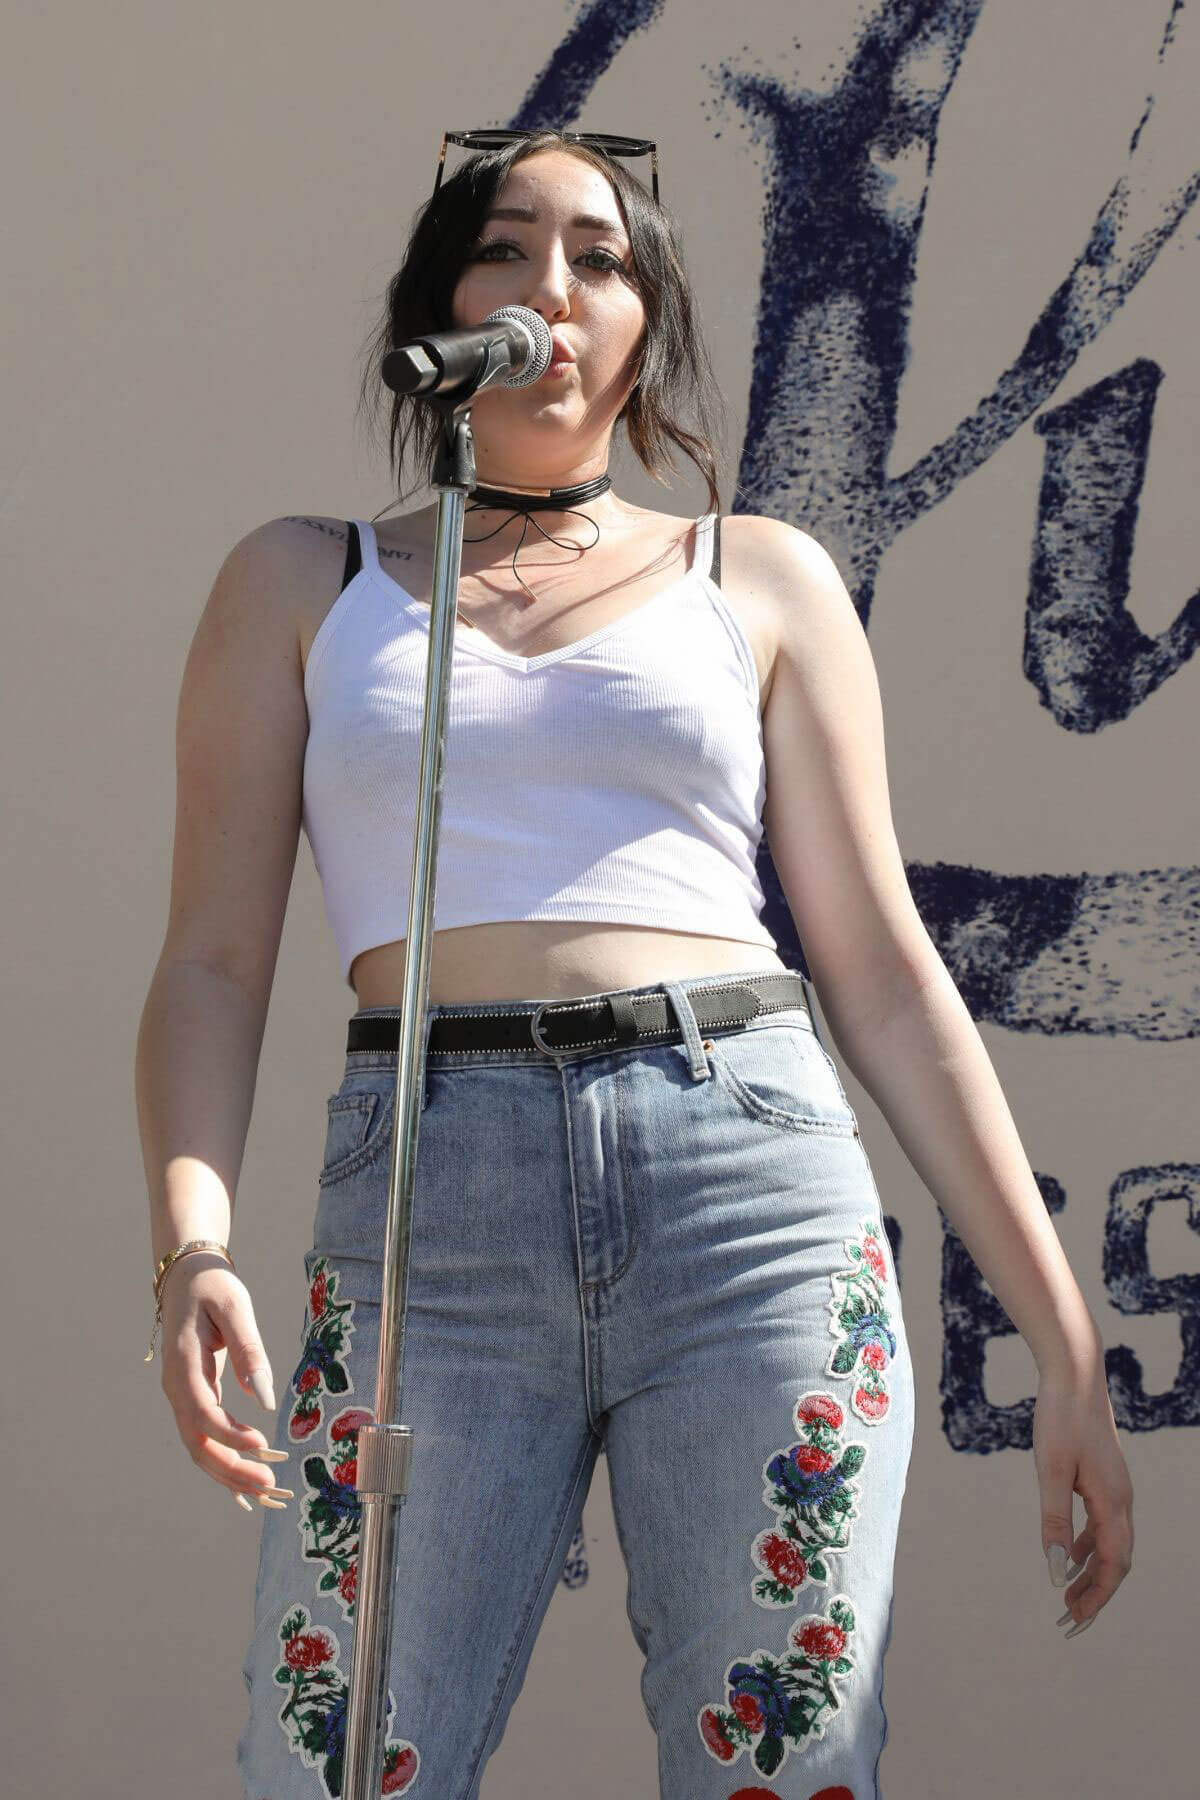 Noah Cyrus Performs at Lucky Lounge Desert Jam in Palm Springs